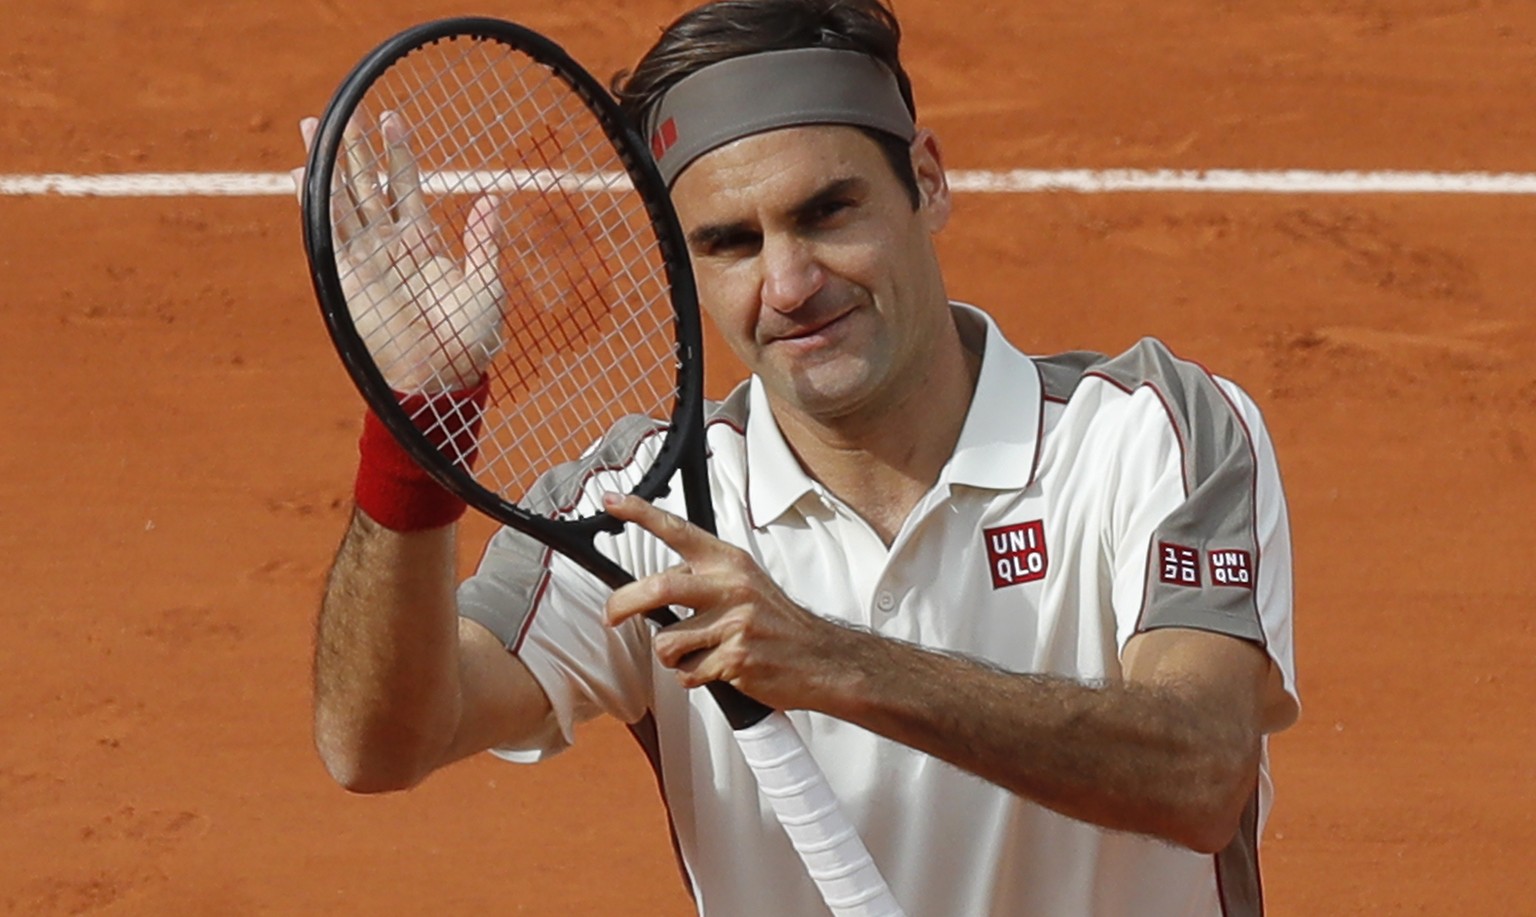 Switzerland&#039;s Roger Federer celebrates winning his second round match of the French Open tennis tournament against Germany&#039;s Oscar Otte in three sets 6-4, 6-3, 6-4, at the Roland Garros stad ...